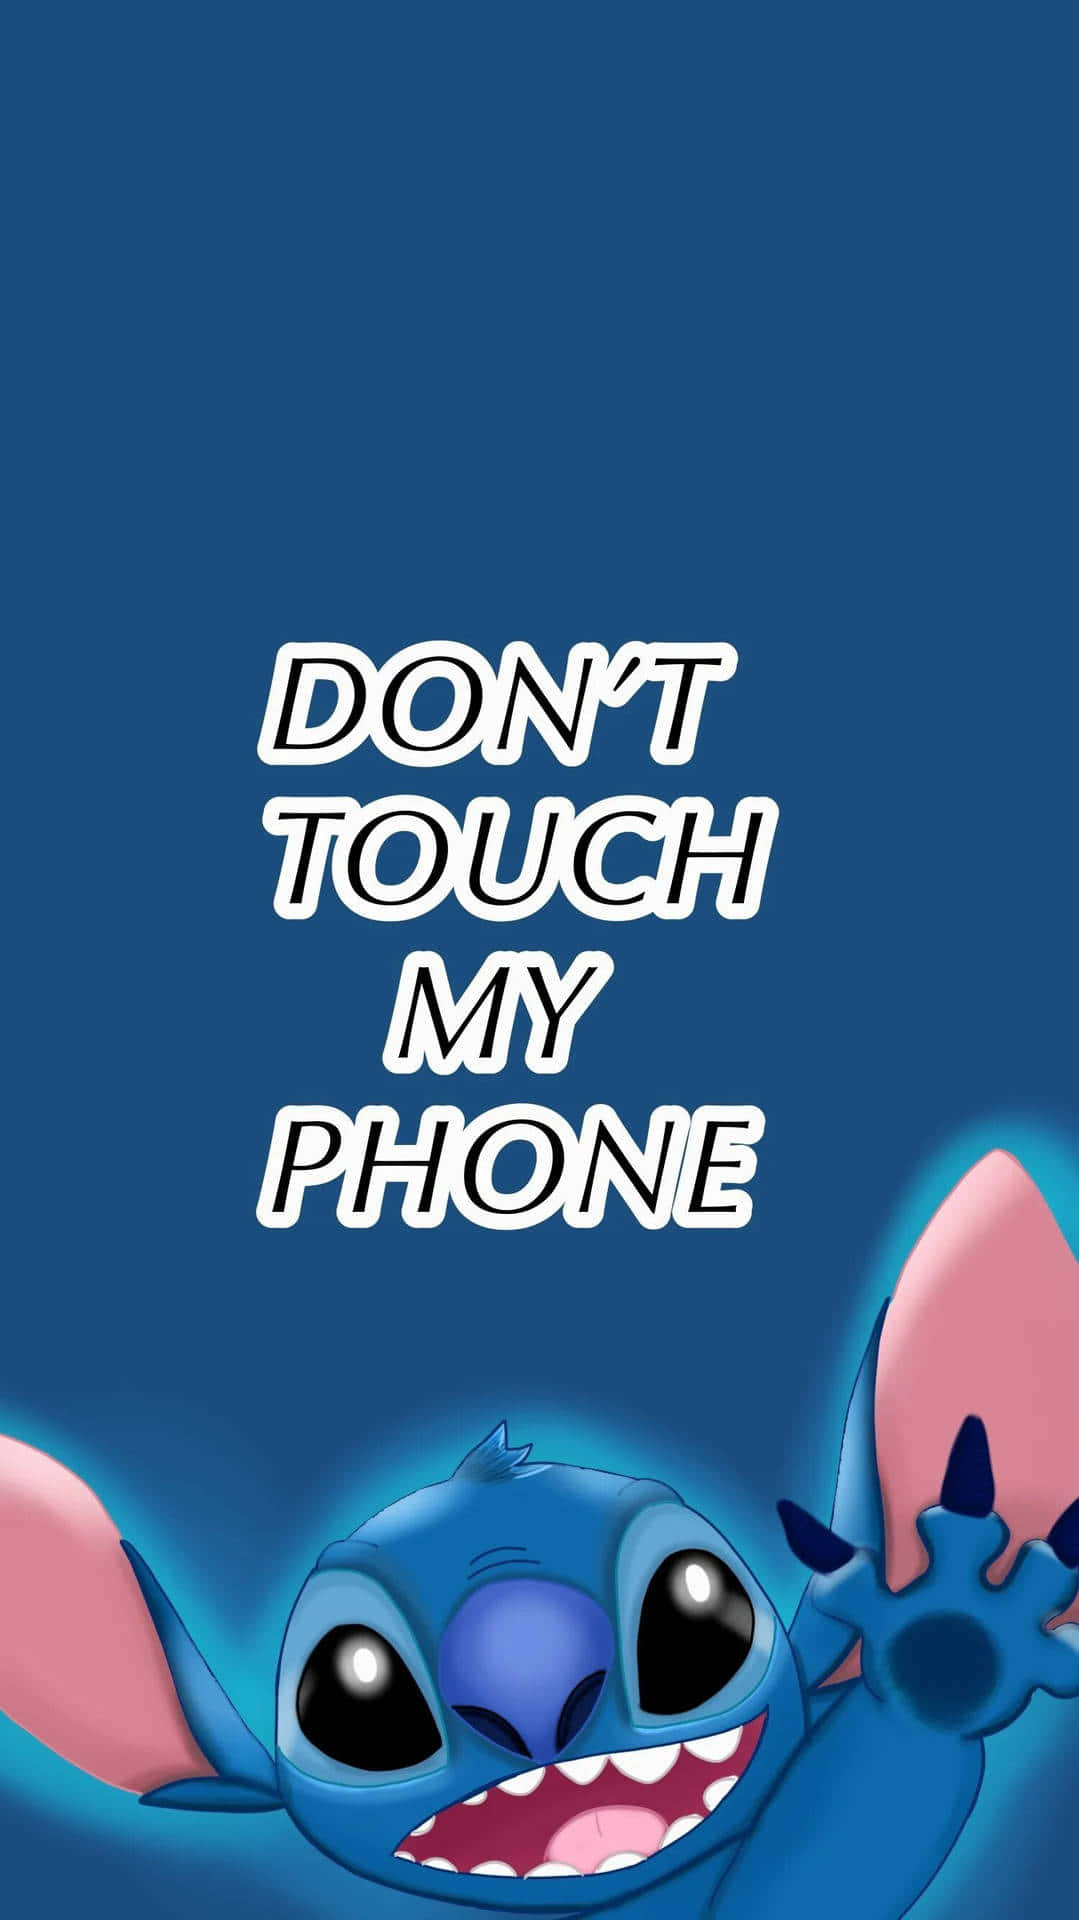 Download Stitch Don't Touch My Phone Wallpaper Wallpaper | Wallpapers.com